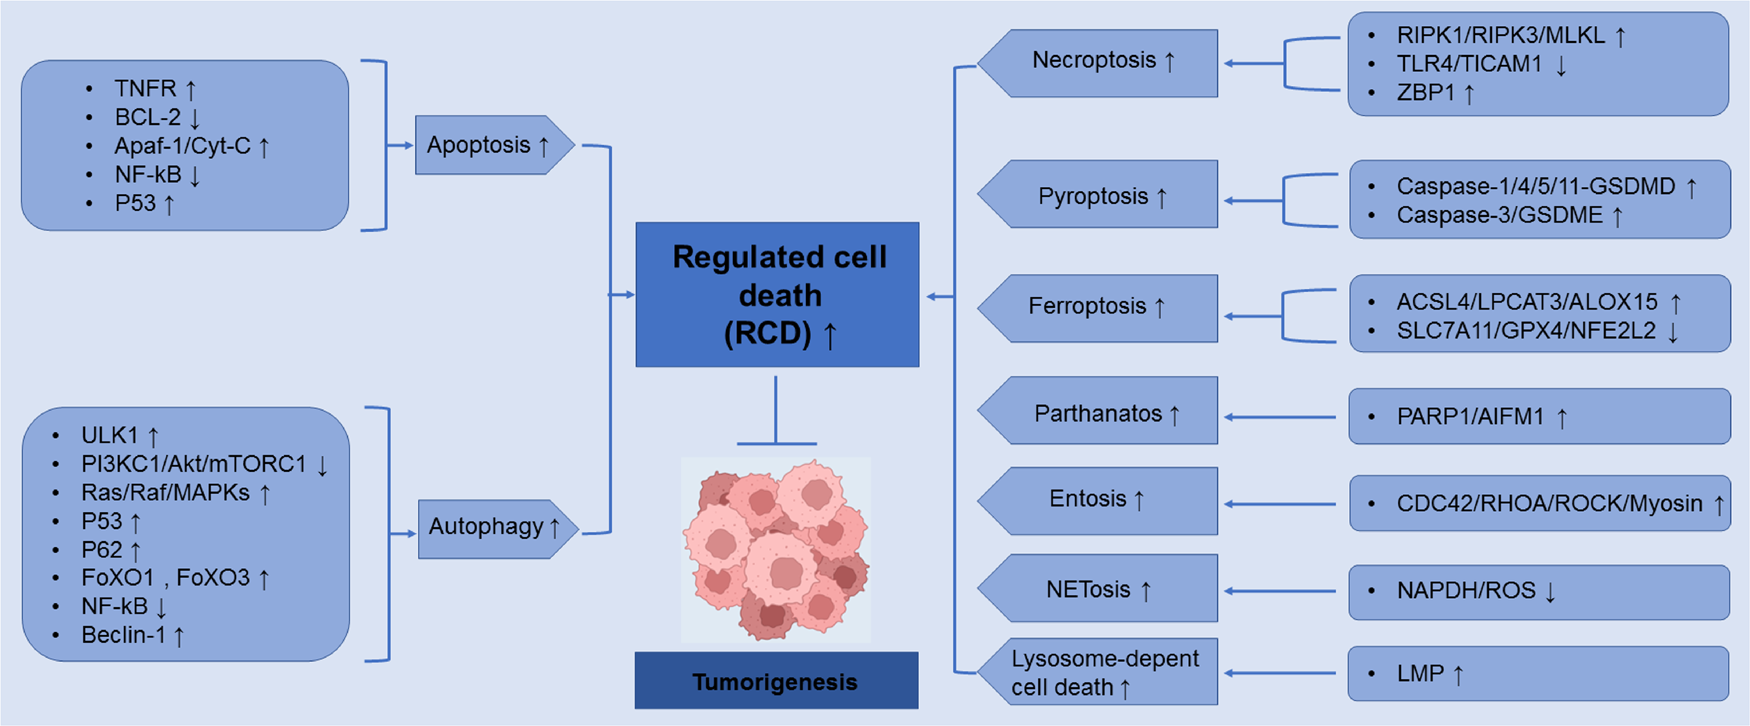 Regulated cell death (RCD) in cancer: key pathways and targeted therapies |  Signal Transduction and Targeted Therapy